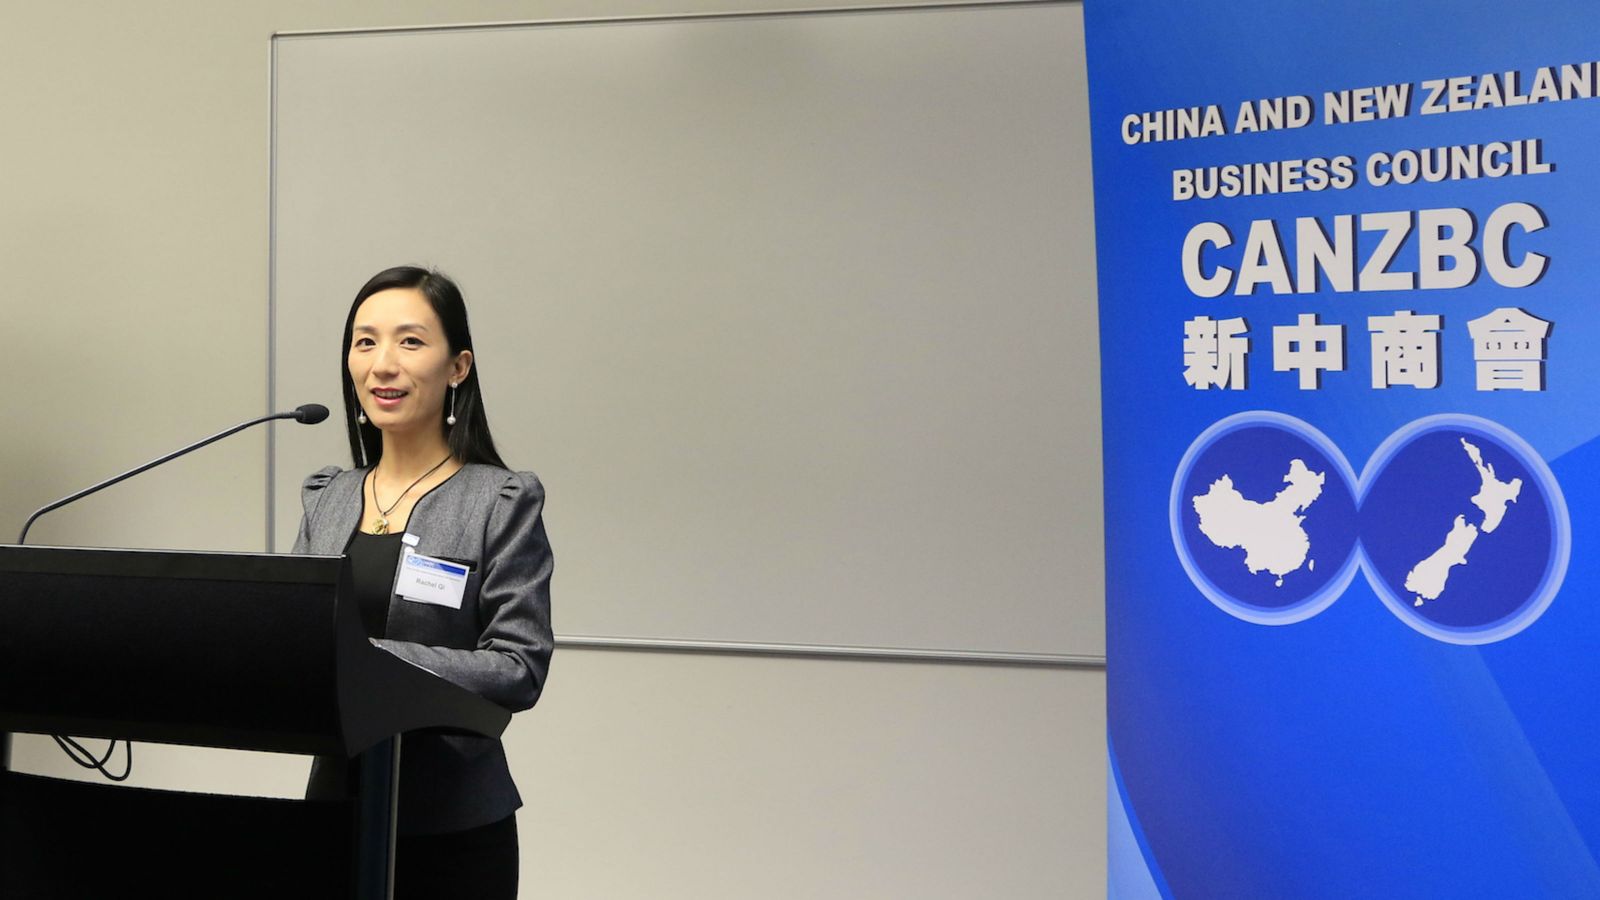 Rachel Qi speaking during the China and New Zealand Business Council's 10th Anniversary celebrations in the Parliament Buildings.